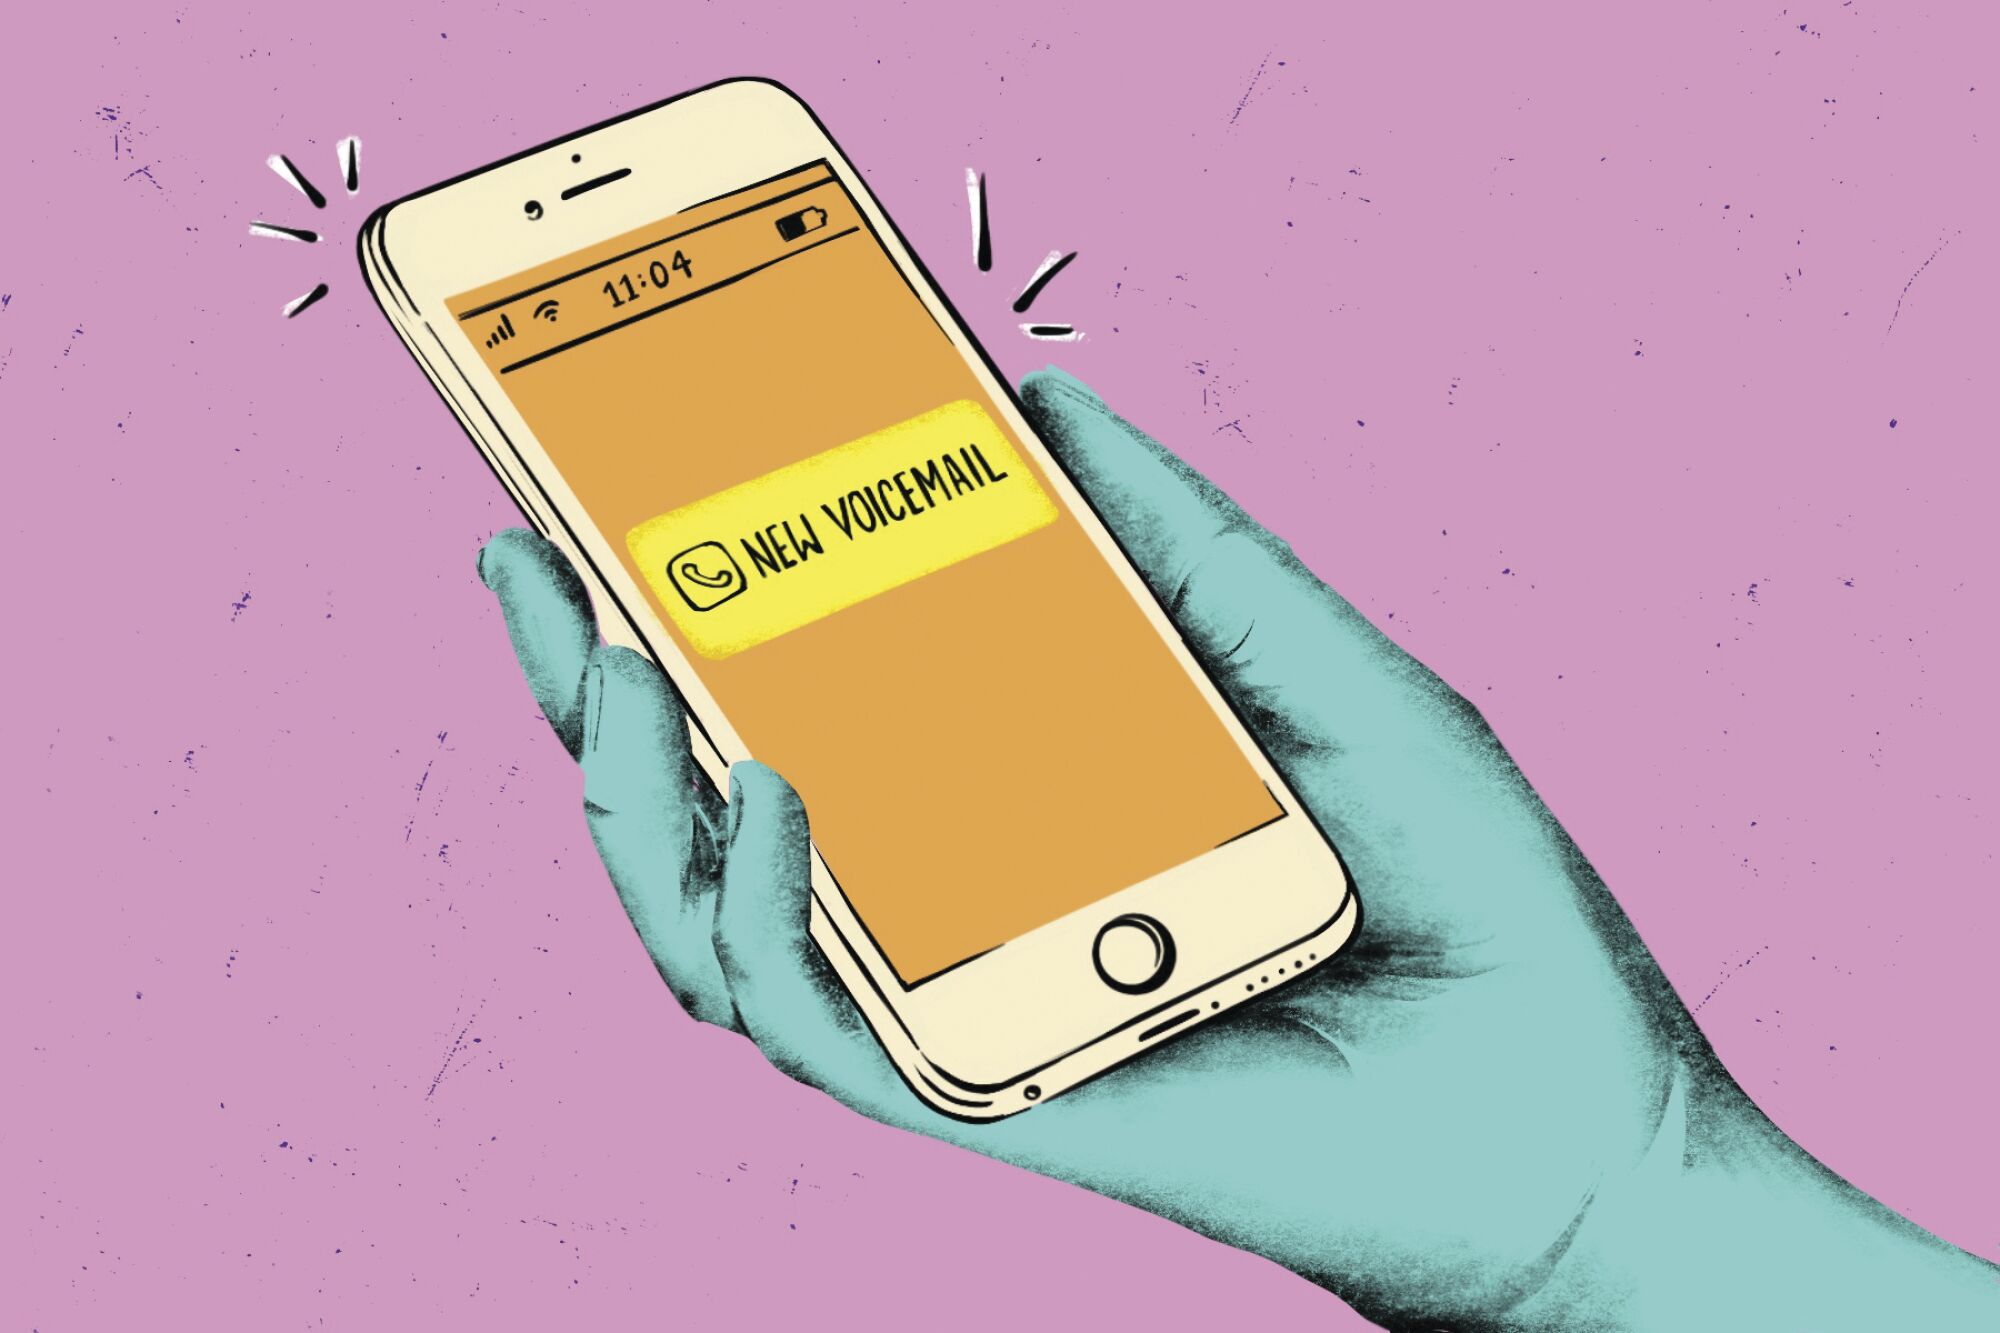 Illustration of phone with new voicemail alert